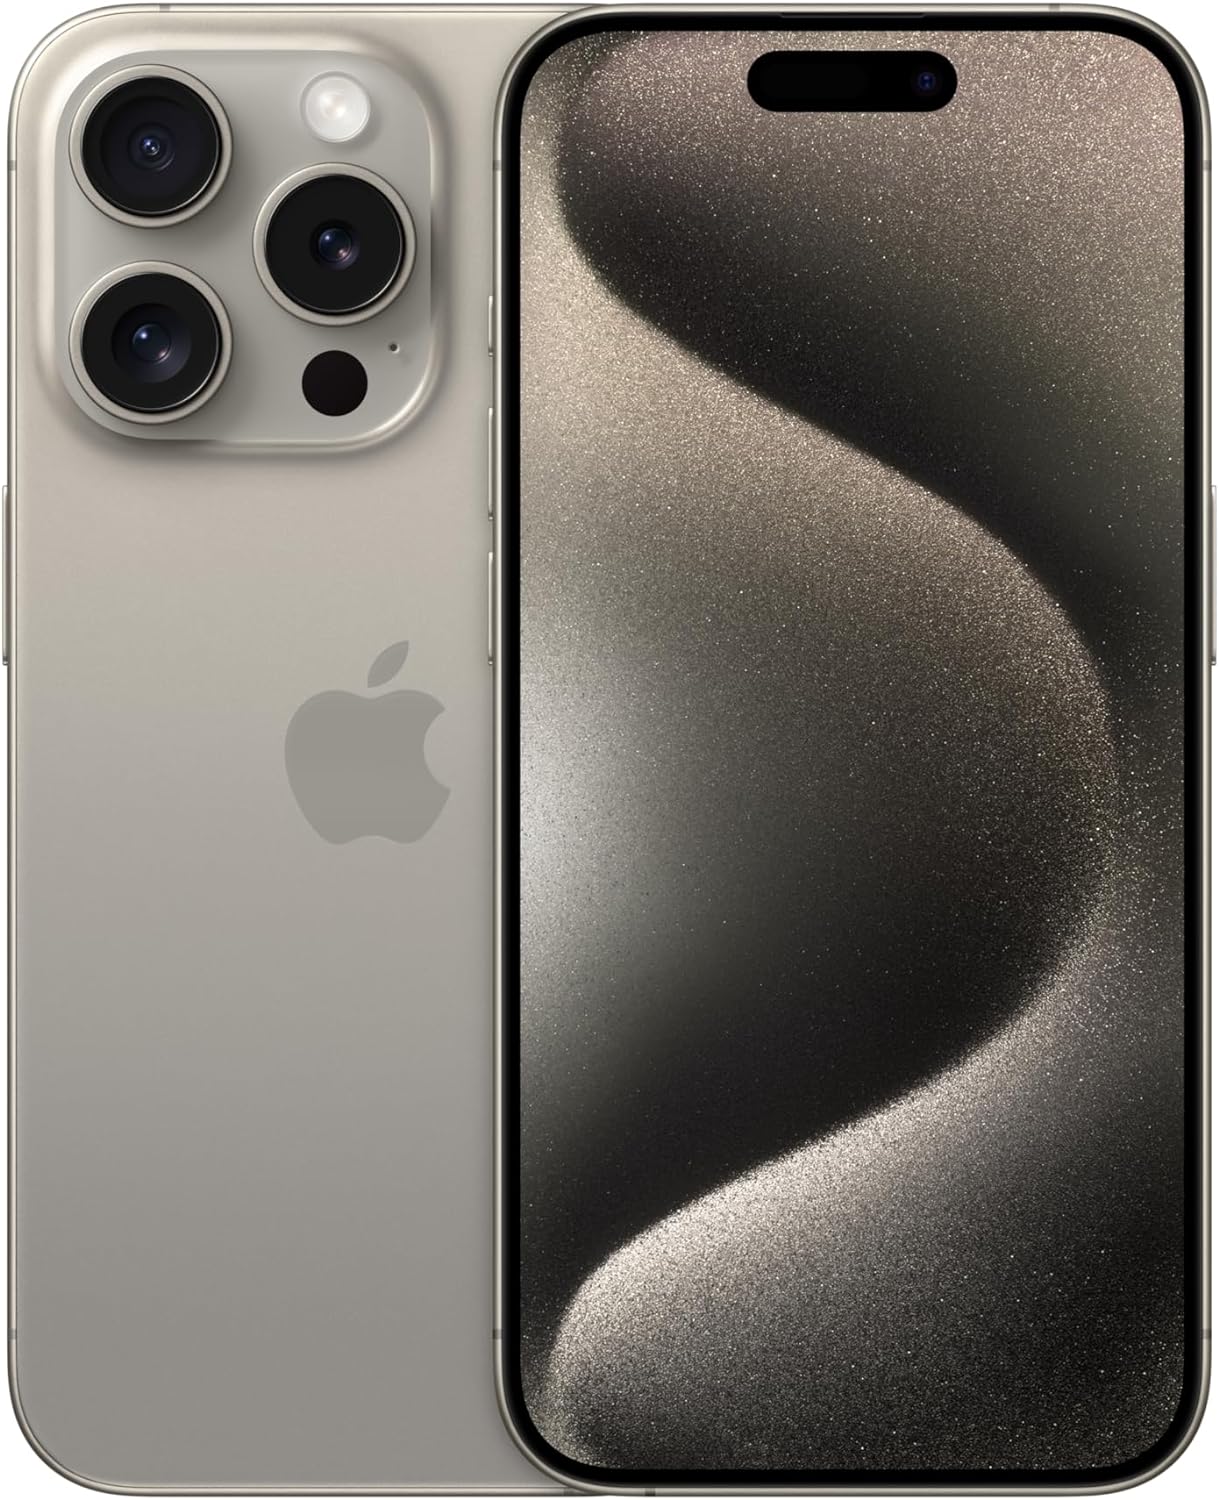 Apple iPhone 15 Pro (256 GB) - Natural Titanium | [Locked] | Boost Infinite plan required starting at $60/mo. | Unlimited Wireless | No trade-in needed to start | Get the - $0.01